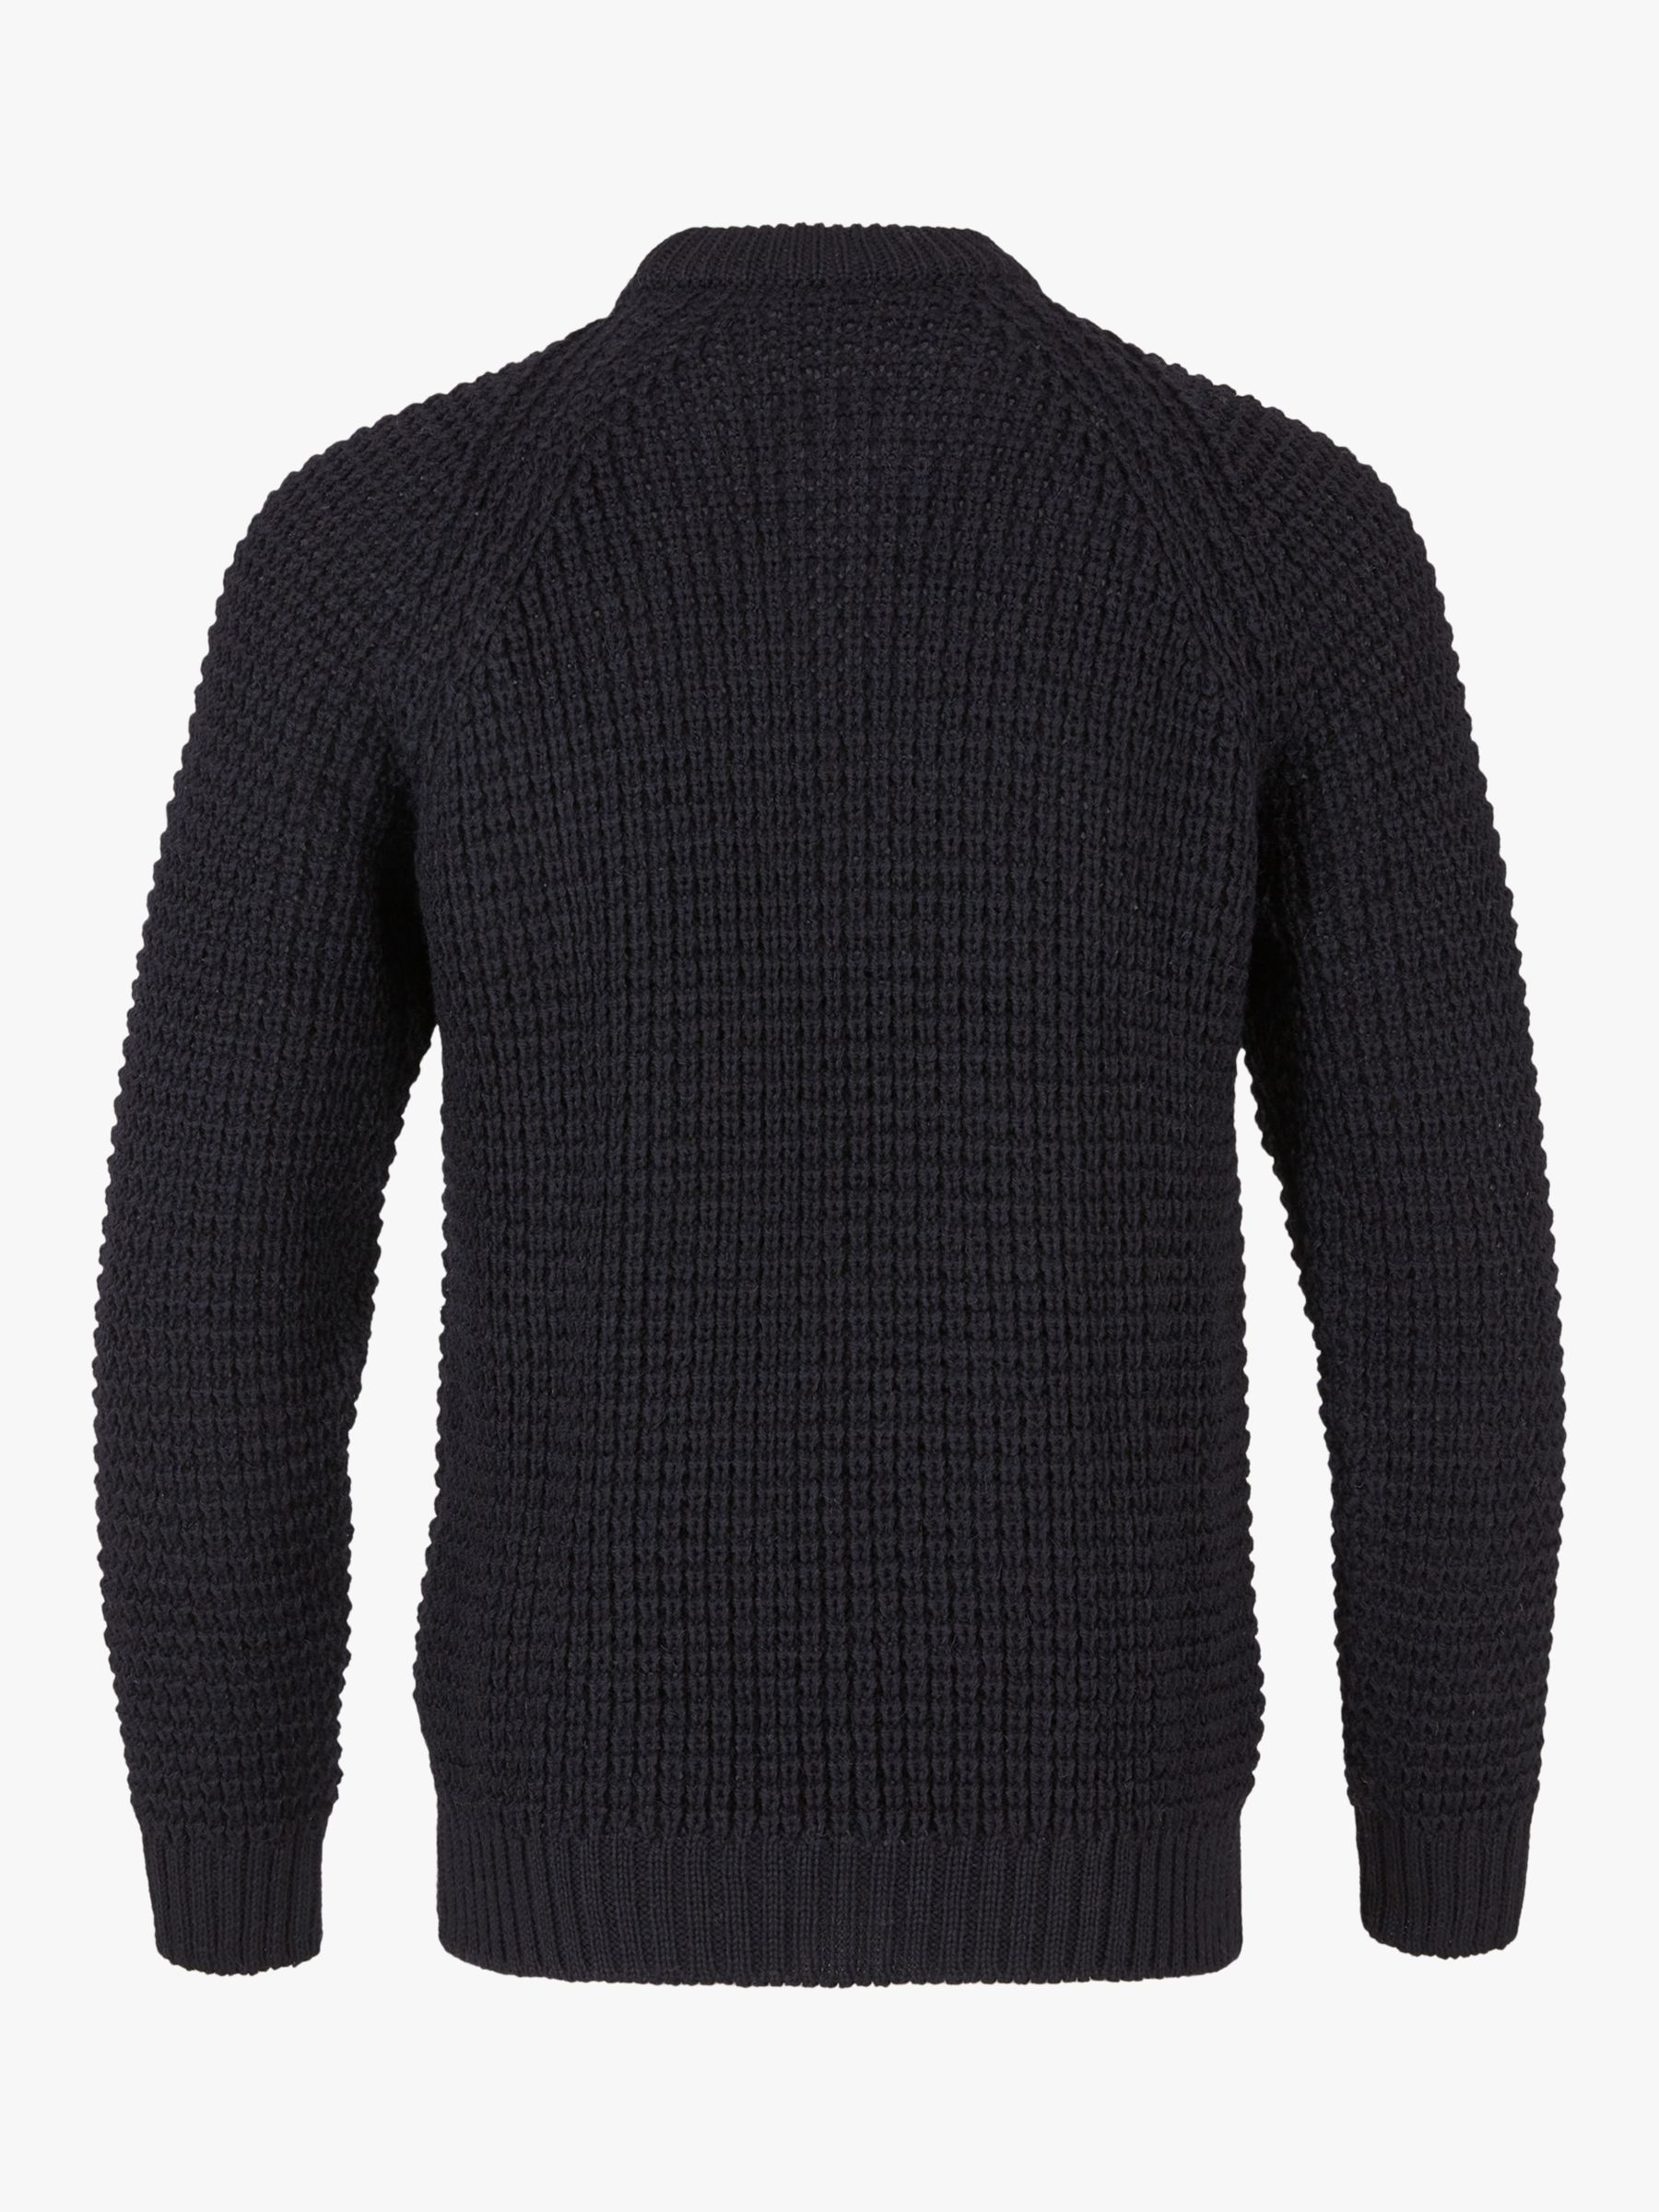 Buy Celtic & Co. Waffle Stitch Crew Neck Wool Jumper Online at johnlewis.com